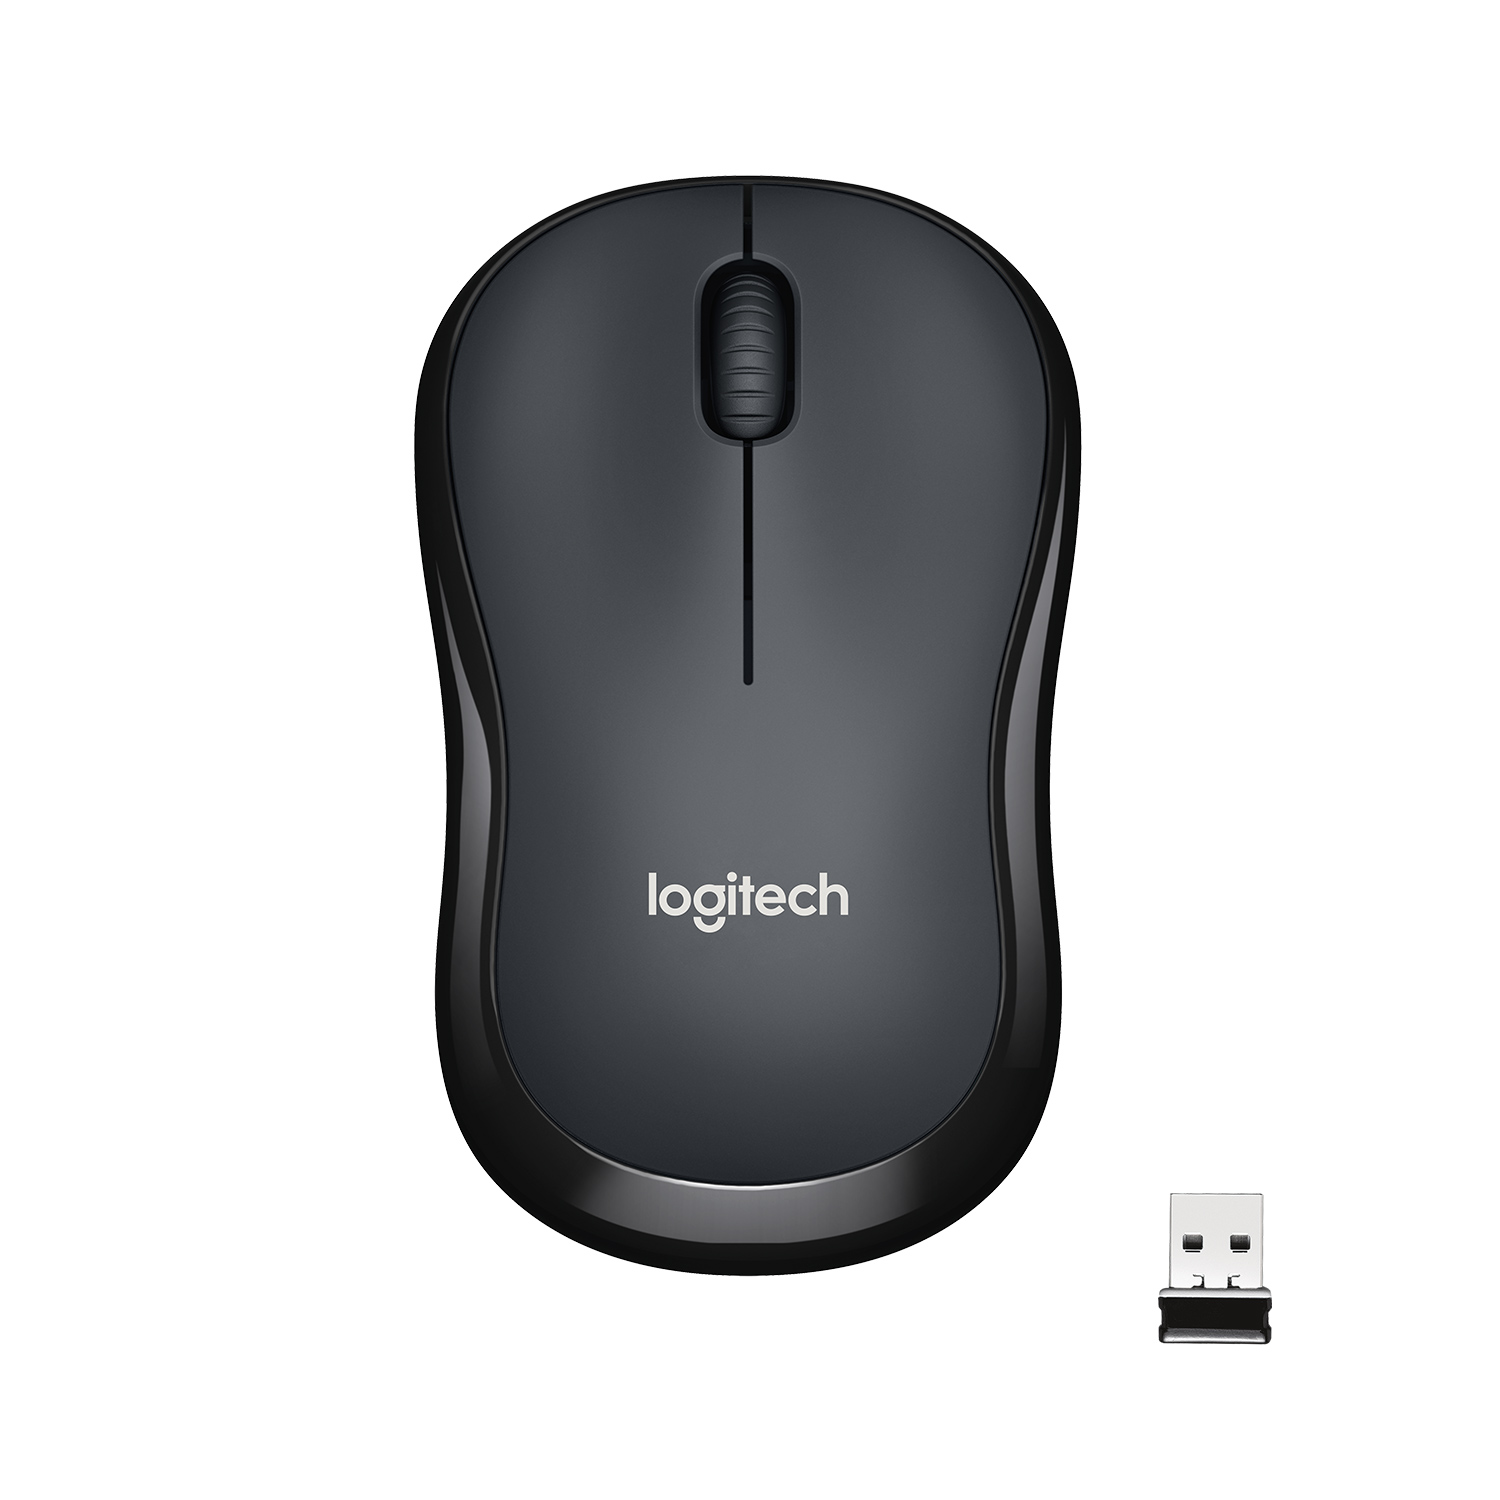 Logitech Silent Wireless Mouse, 2.4 GHz with USB Receiver, 1000 DPI Optical Tracking, Black - image 1 of 9